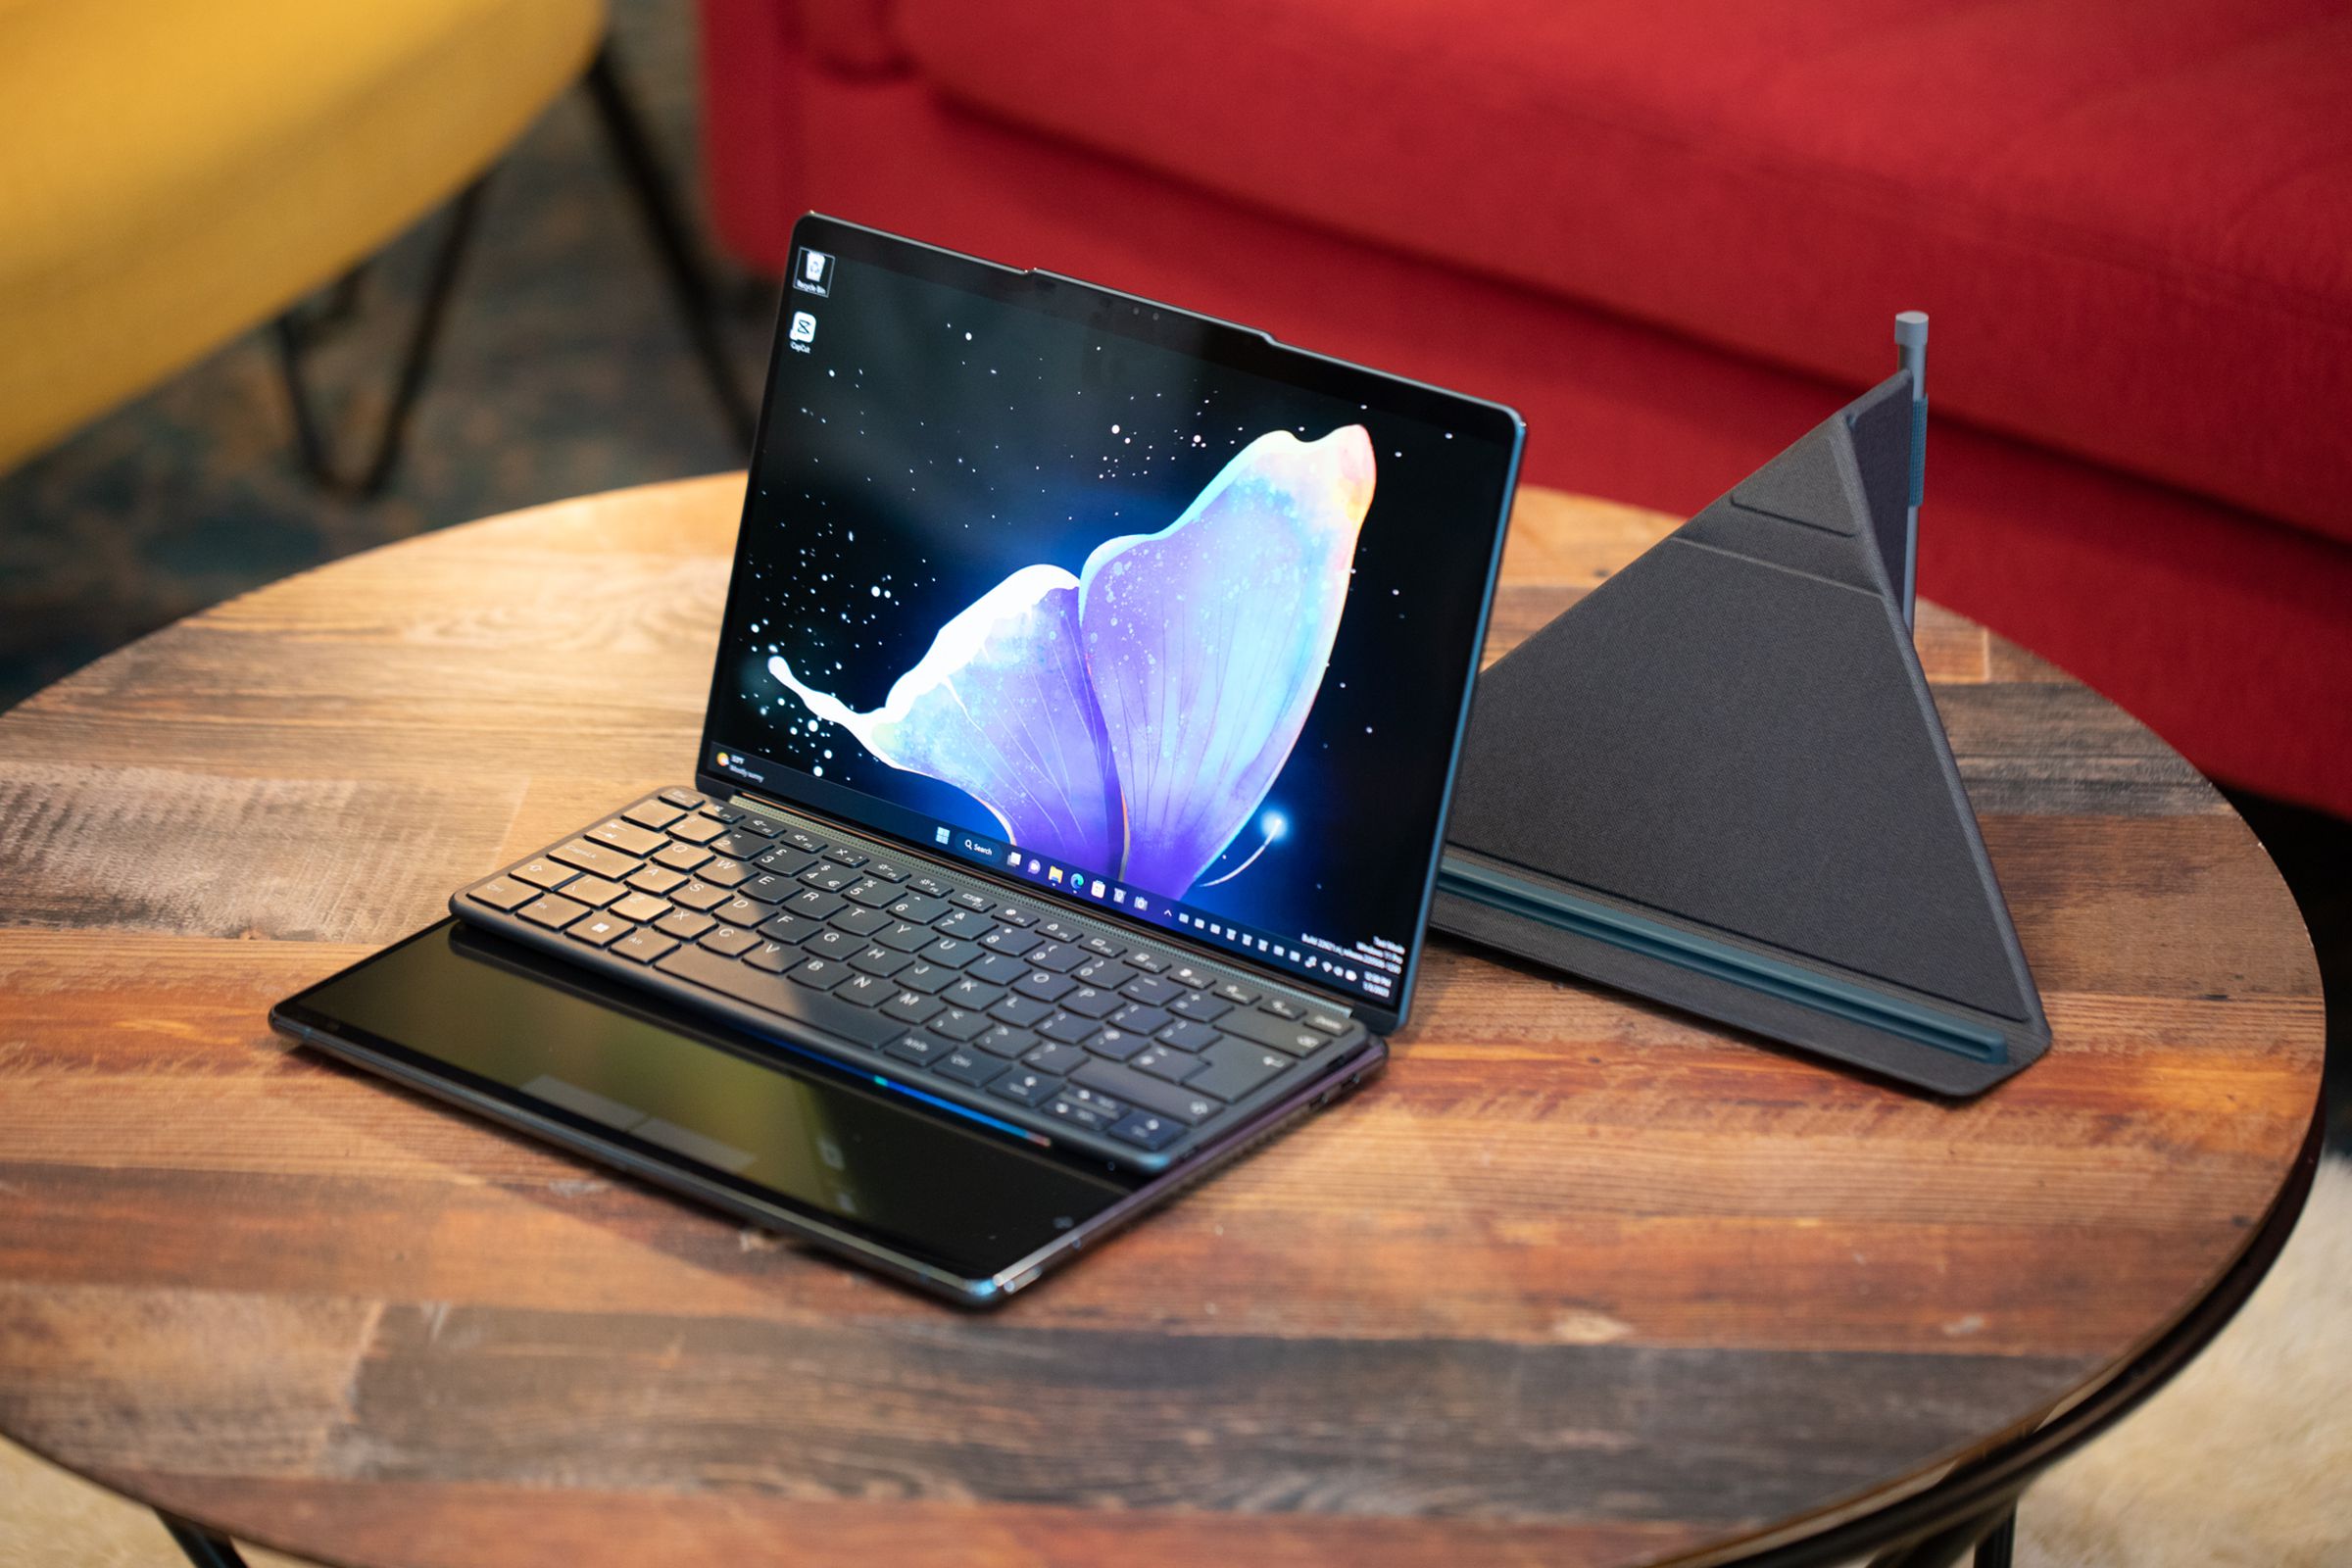 The Lenovo Yoga Book 9i folds into laptop mode with the keyboard attached.